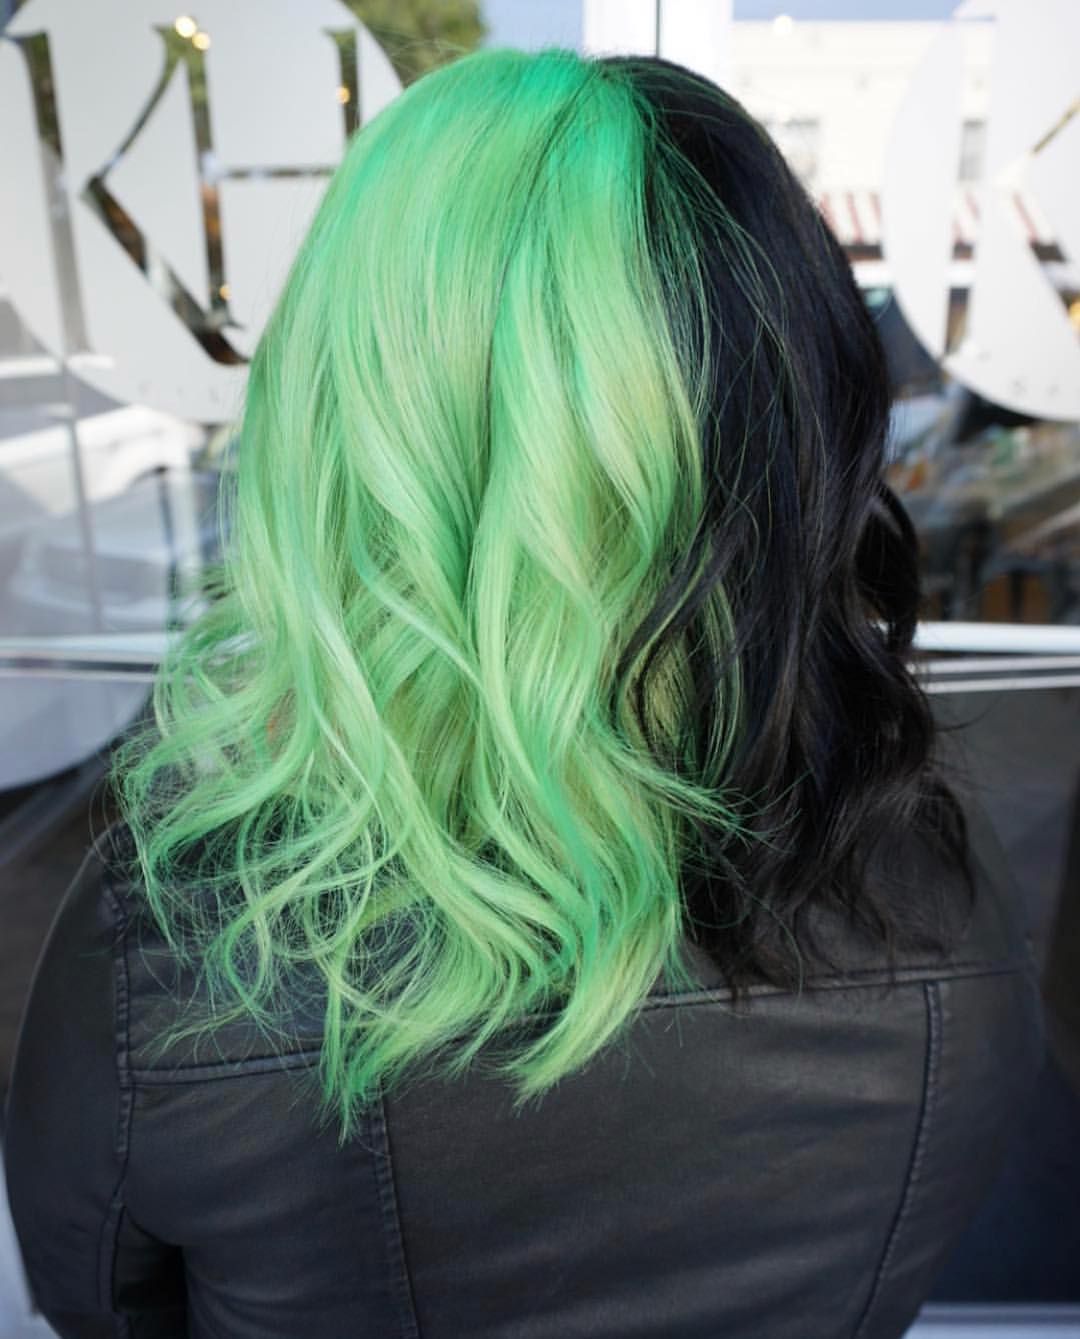 abby voigt recommends Half Black Half Neon Green Hair